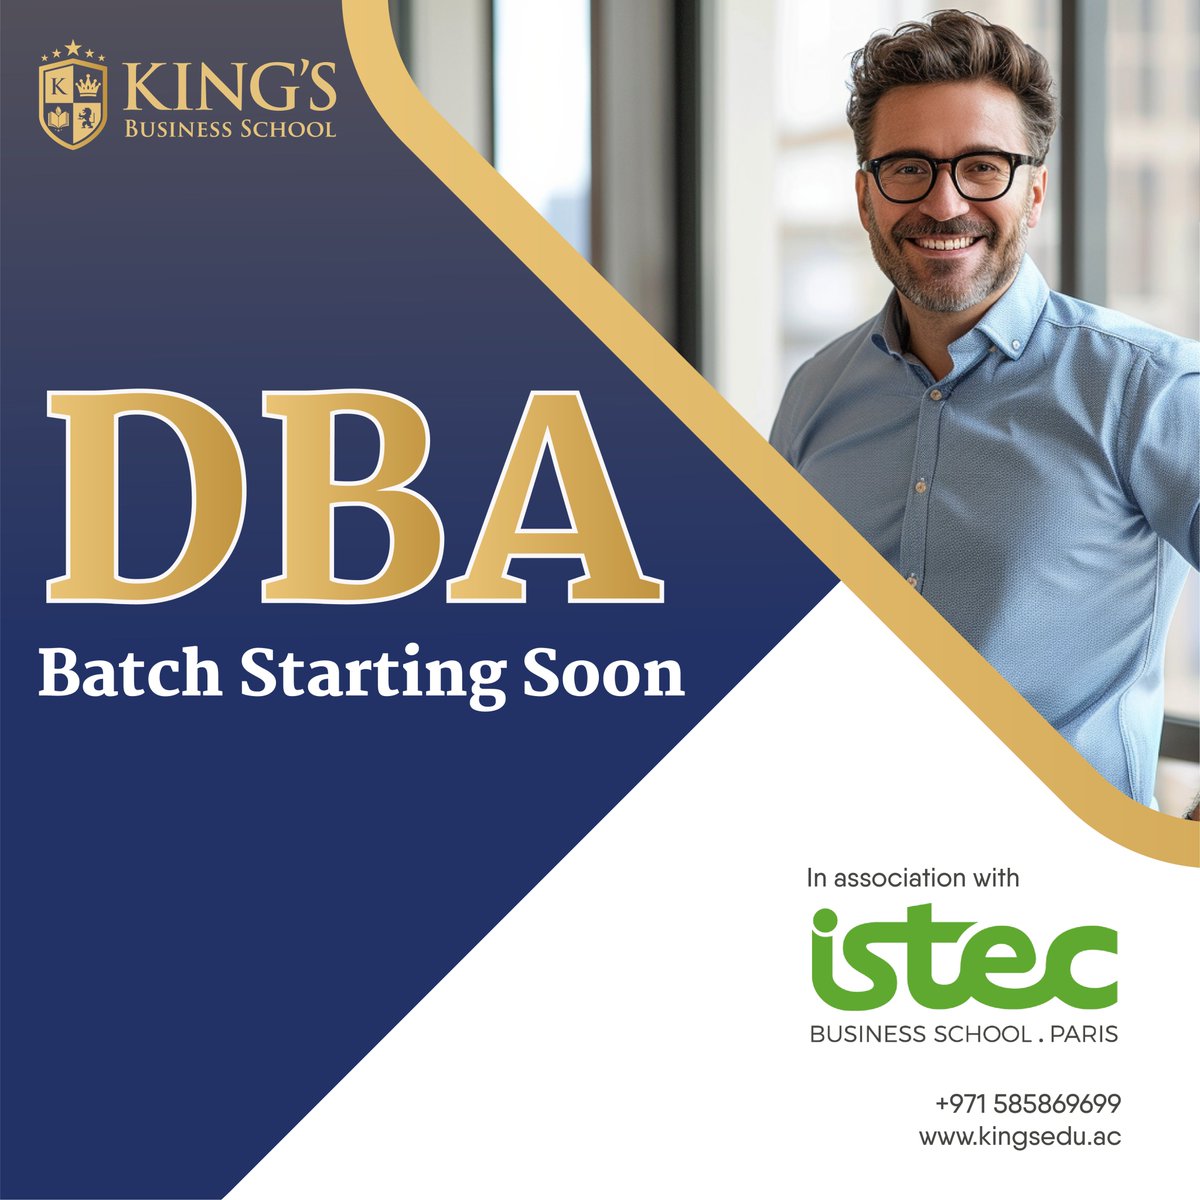 Exciting News: Our new batch of Doctorate in Business Administration (DBA) is about to commence!
Don't miss this opportunity to elevate your career – reserve your seat now!
.
.
#DBA #DoctorOfBusinessAdministration #BusinessLeadership #kingsbusinessschool #DBAProgram #KingsBSchool